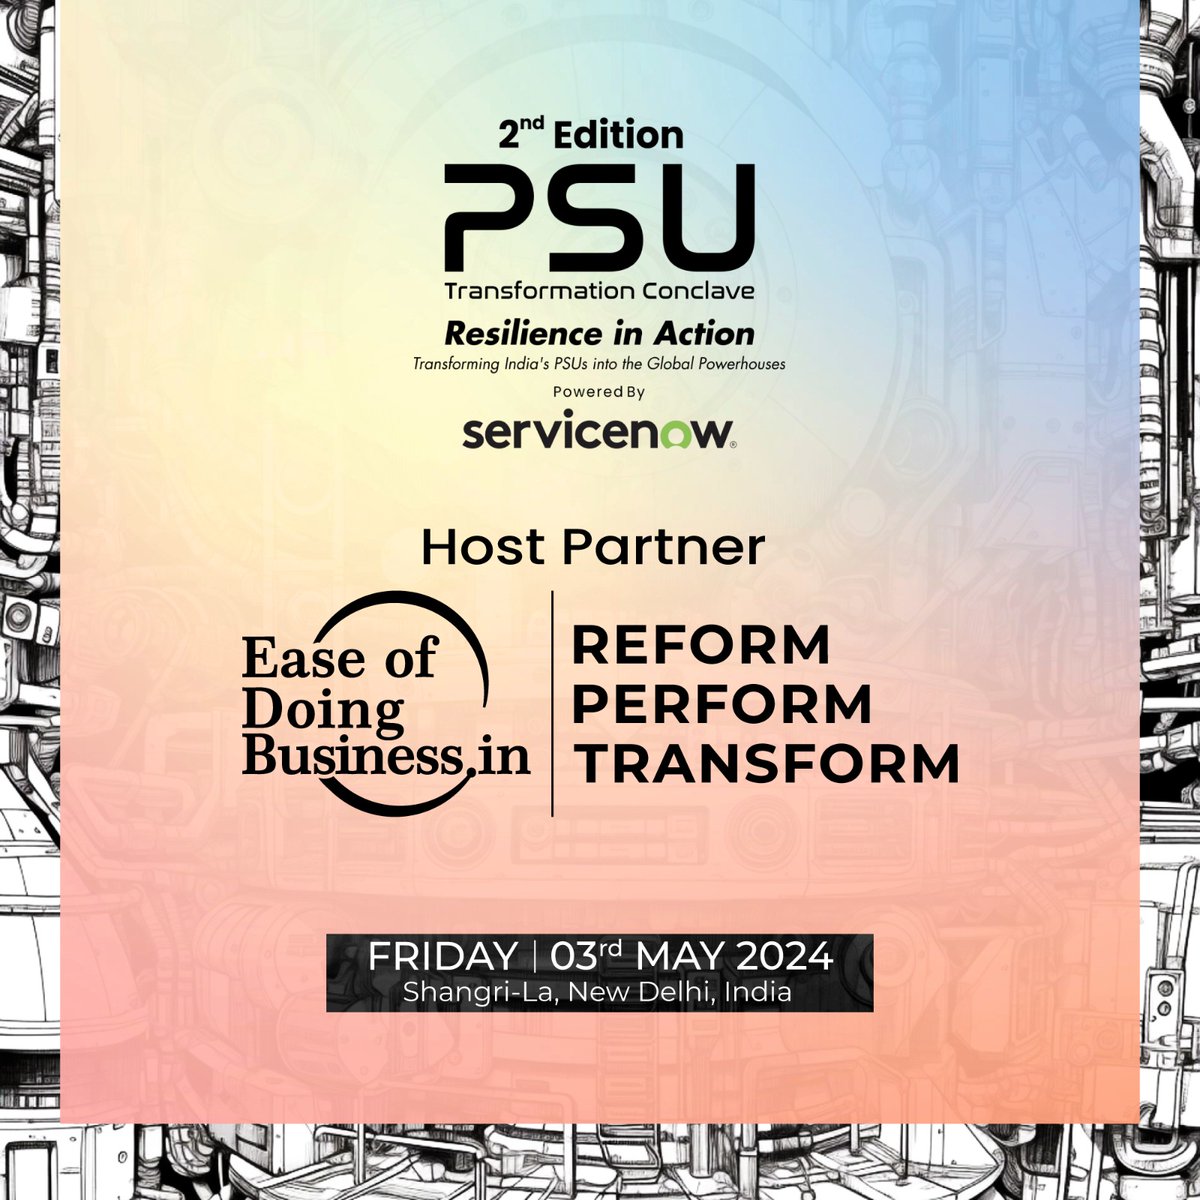 We are glad to announce that @EODB_IN is the Host Partner of 2nd Edition PSU Transformative Conclave, Organised by @ilougemedia Presented by @ServiceNow tomorrow on 3rd of May 2024 at Shangri-La, Connaught Place, New Delhi, India. 🌟

#PSUs #EconomicPowerhouse #India